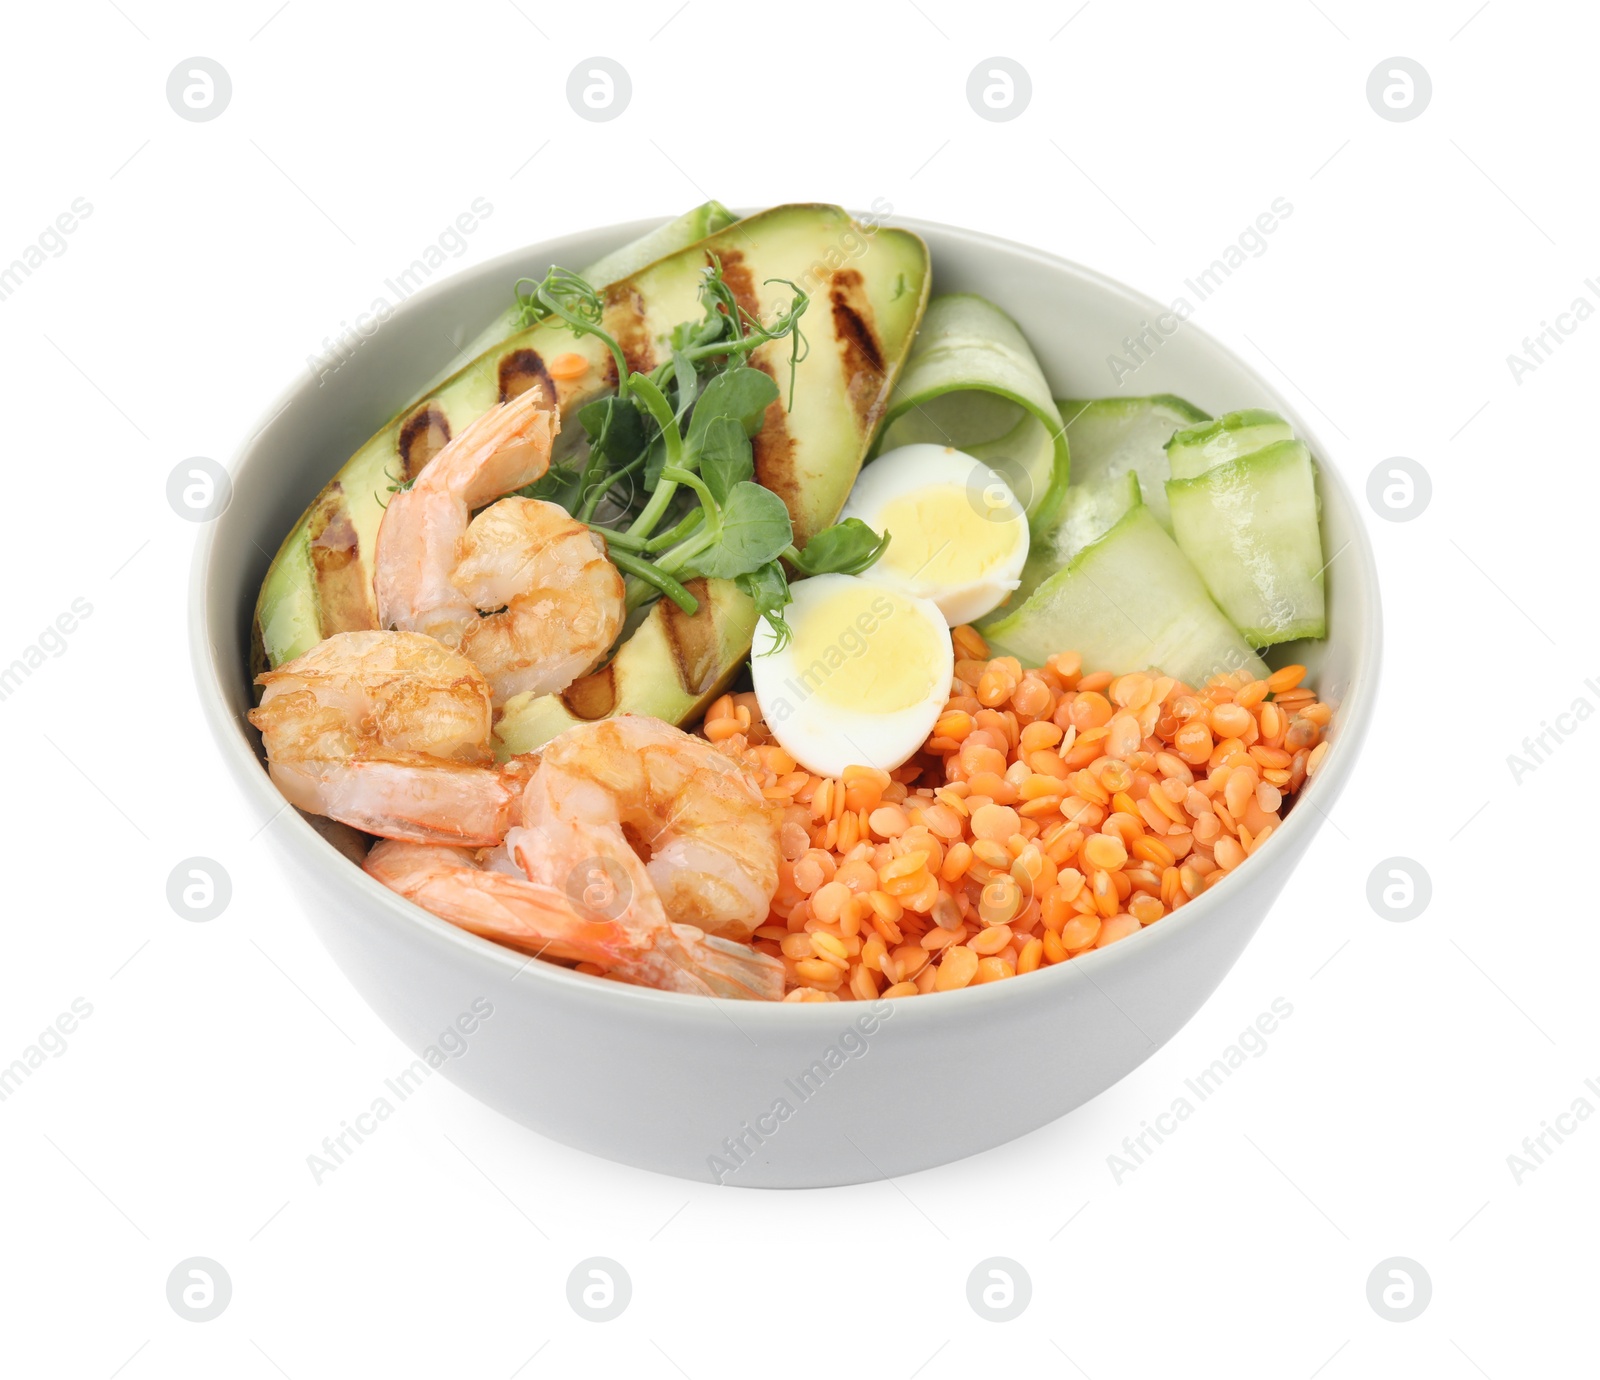 Photo of Delicious lentil bowl with avocado, shrimps, egg and cucumber on white background